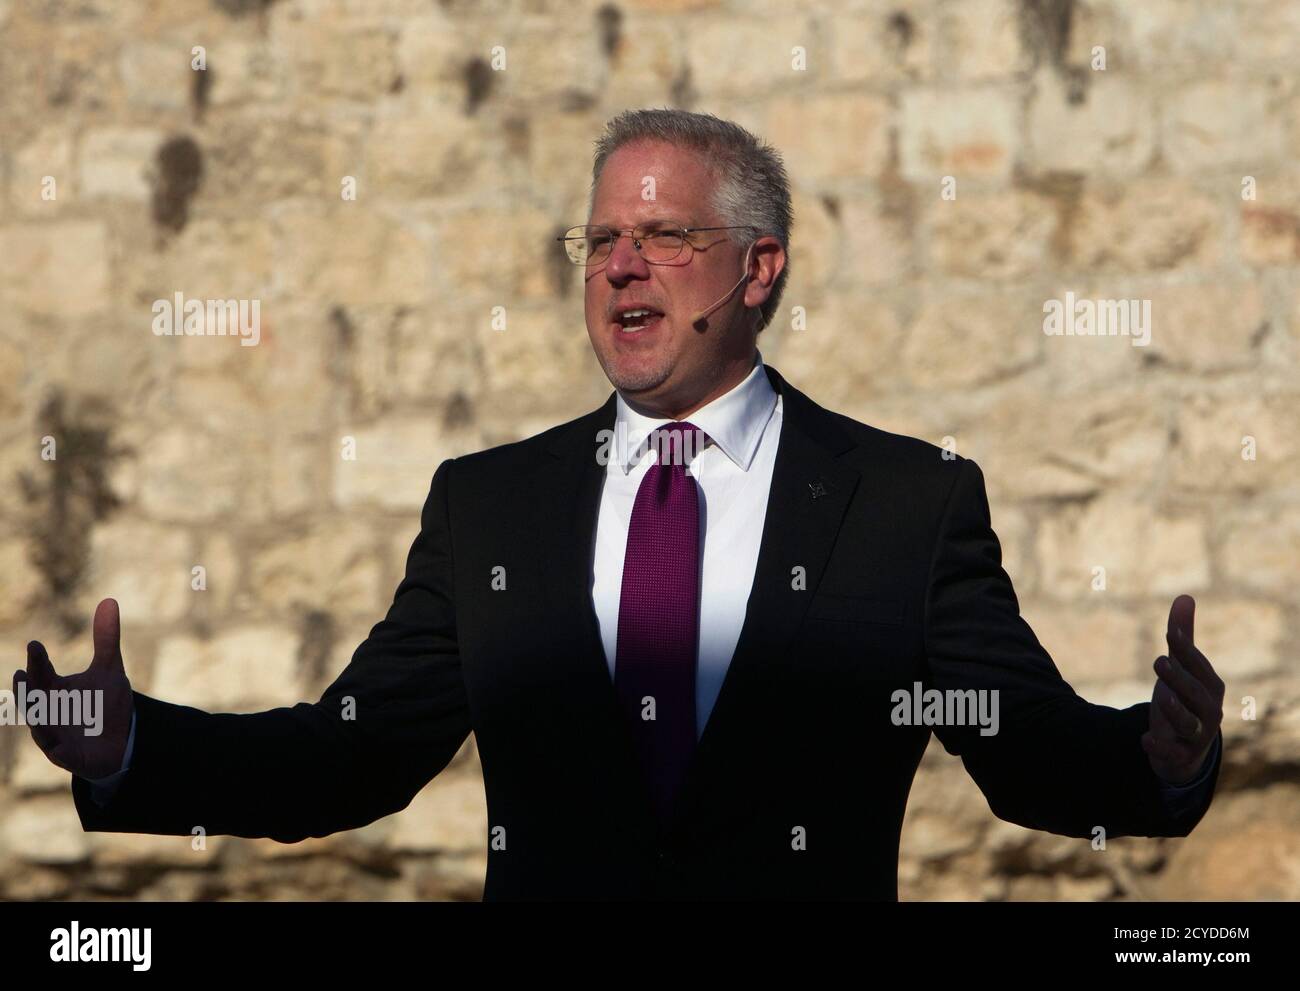 U.S. conservative broadcaster Glenn Beck gestures as he addresses the crowd during his 'Restoring Courage' rally in Jerusalem's Old City August 24, 2011. On the fringes of Jerusalem's most volatile holy sites, Beck declared his support for Israel on Wednesday at the rally showcasing fundamentalist Christian backing for the Jewish state. REUTERS/Ronen Zvulun (JERUSALEM - Tags: POLITICS RELIGION) Stock Photo